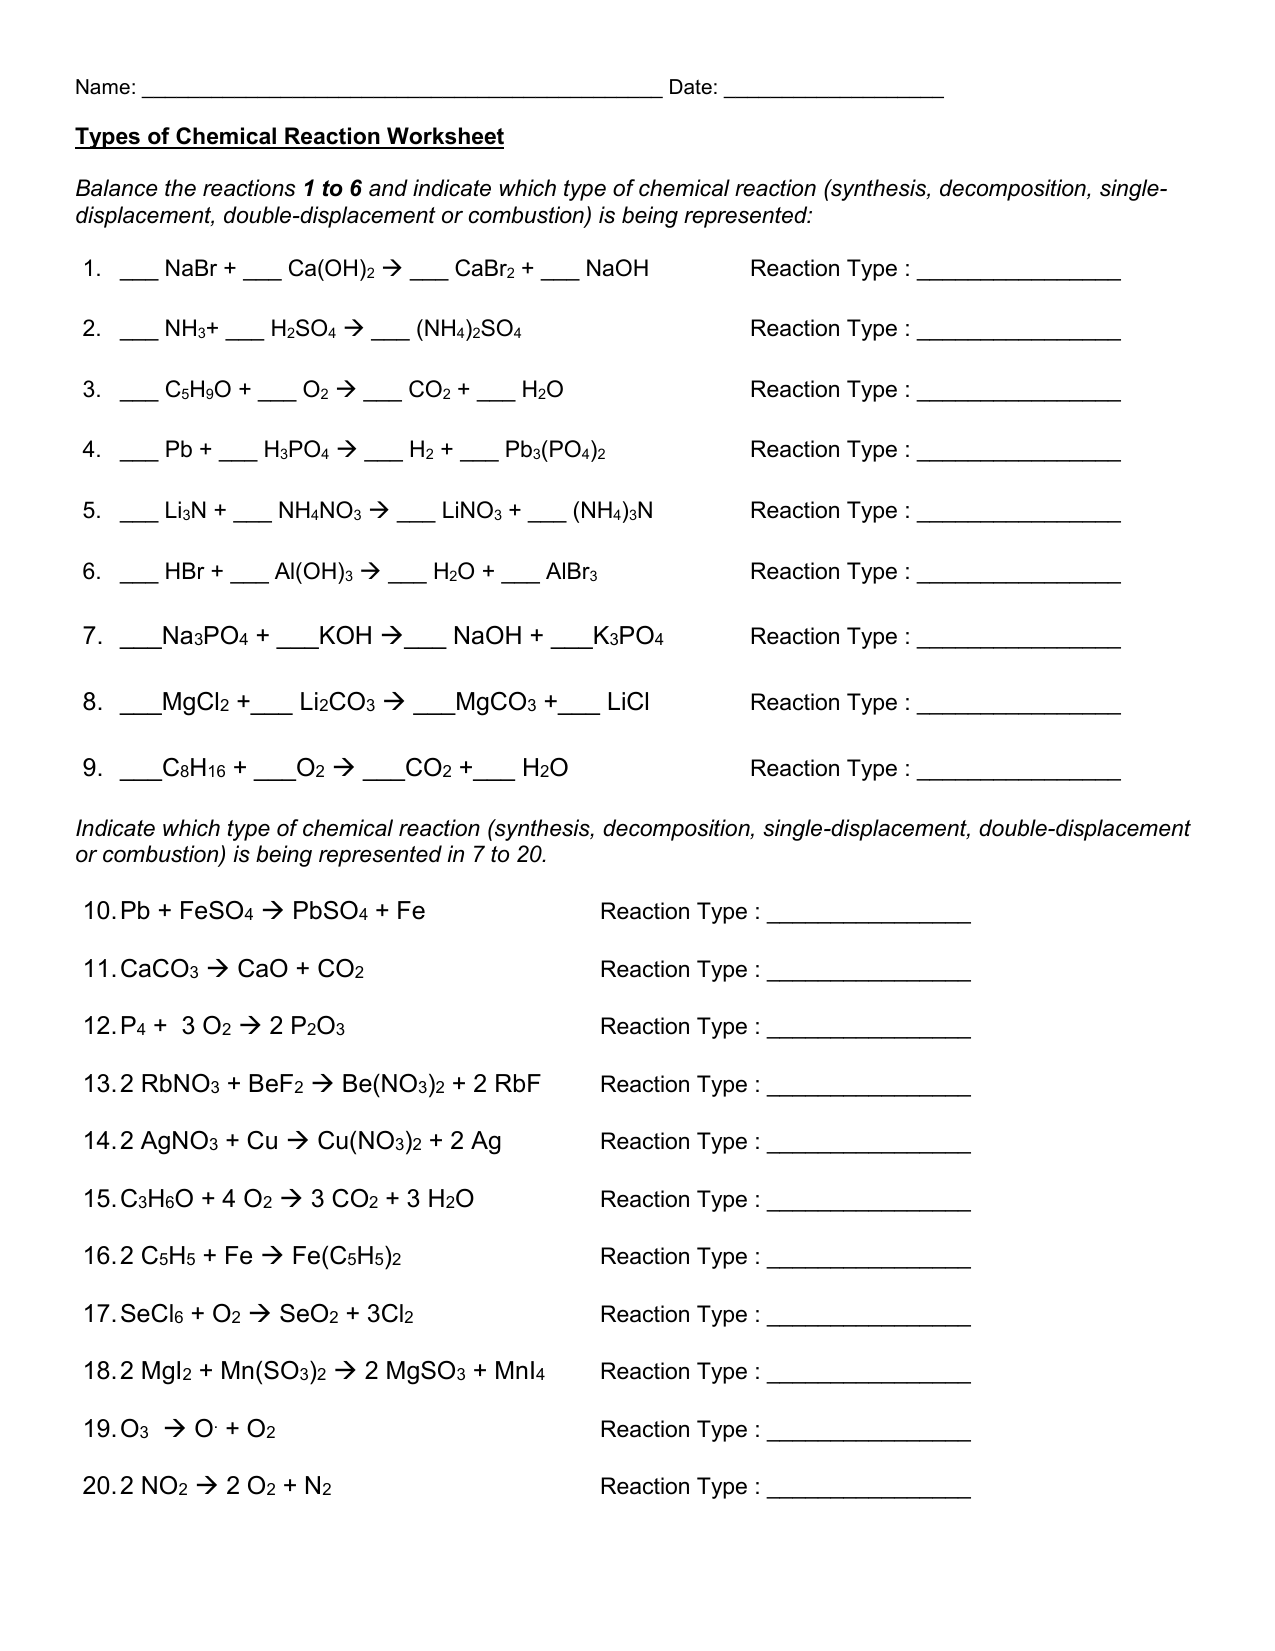 Types of Chemical Reaction Worksheet Intended For Chemical Reaction Type Worksheet